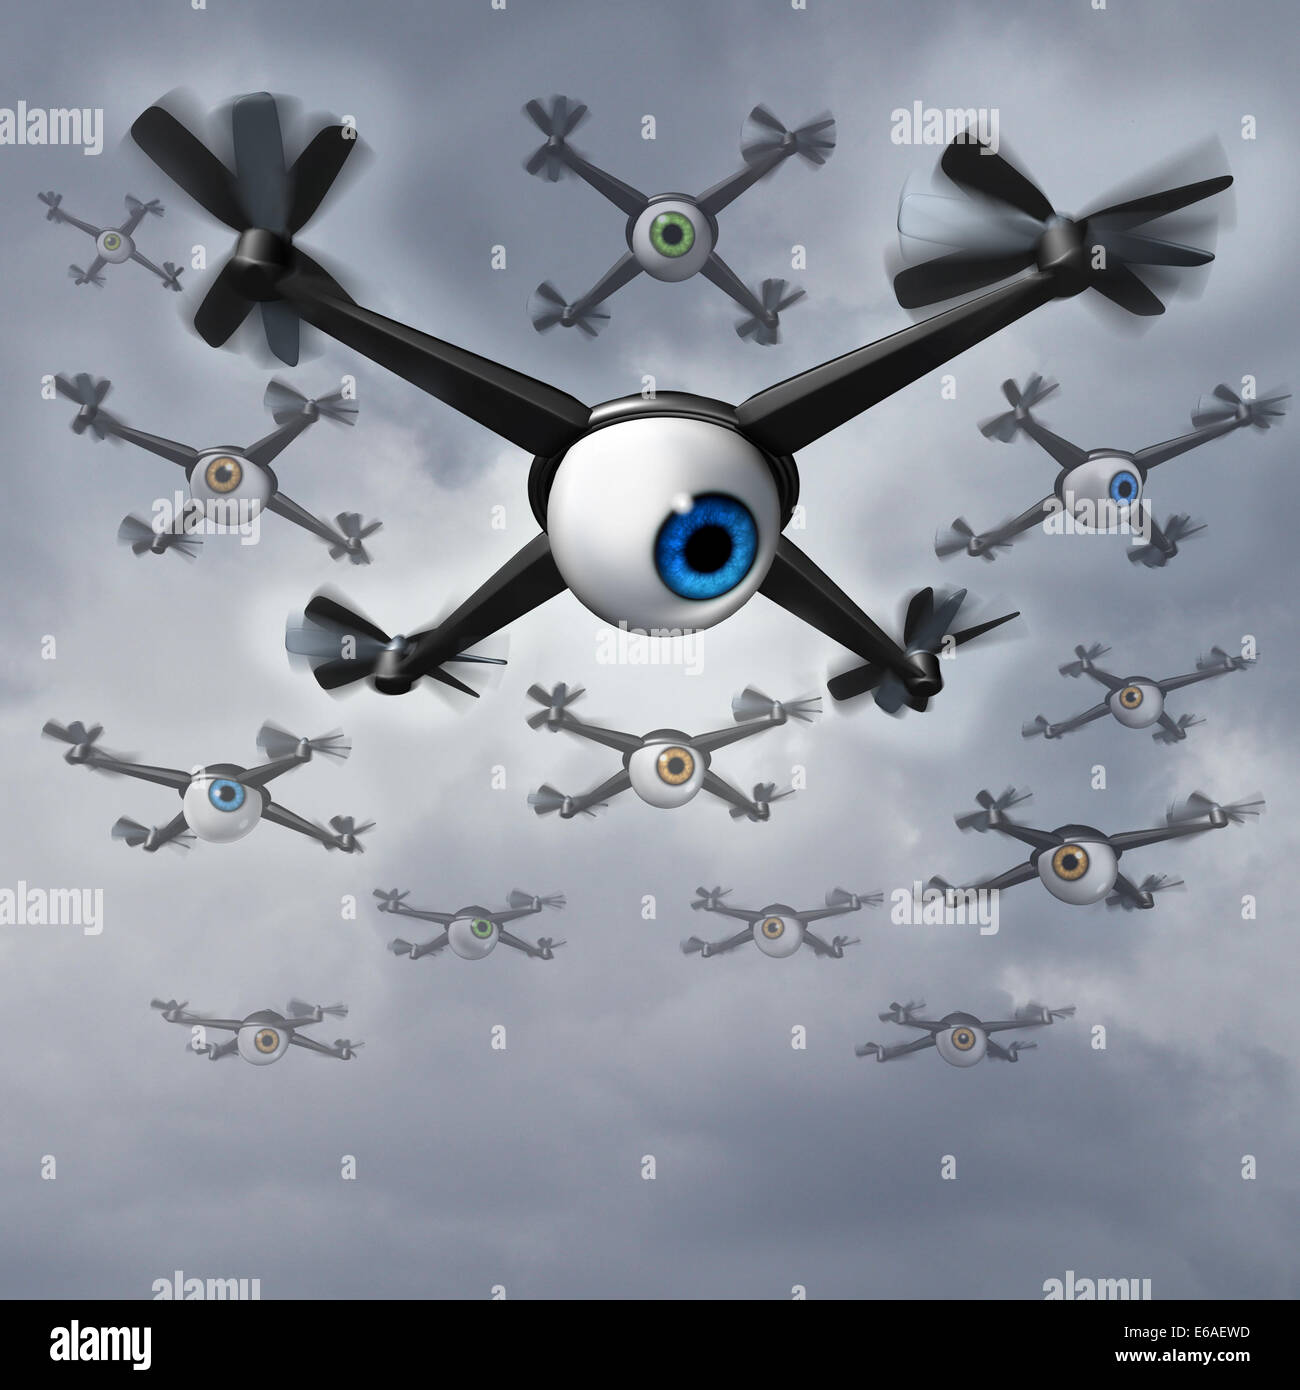 Drone privacy concerns social issues concept as a group of spy drones with human eye balls collecting private information in a reconnaissance and surveilliance mission. Stock Photo